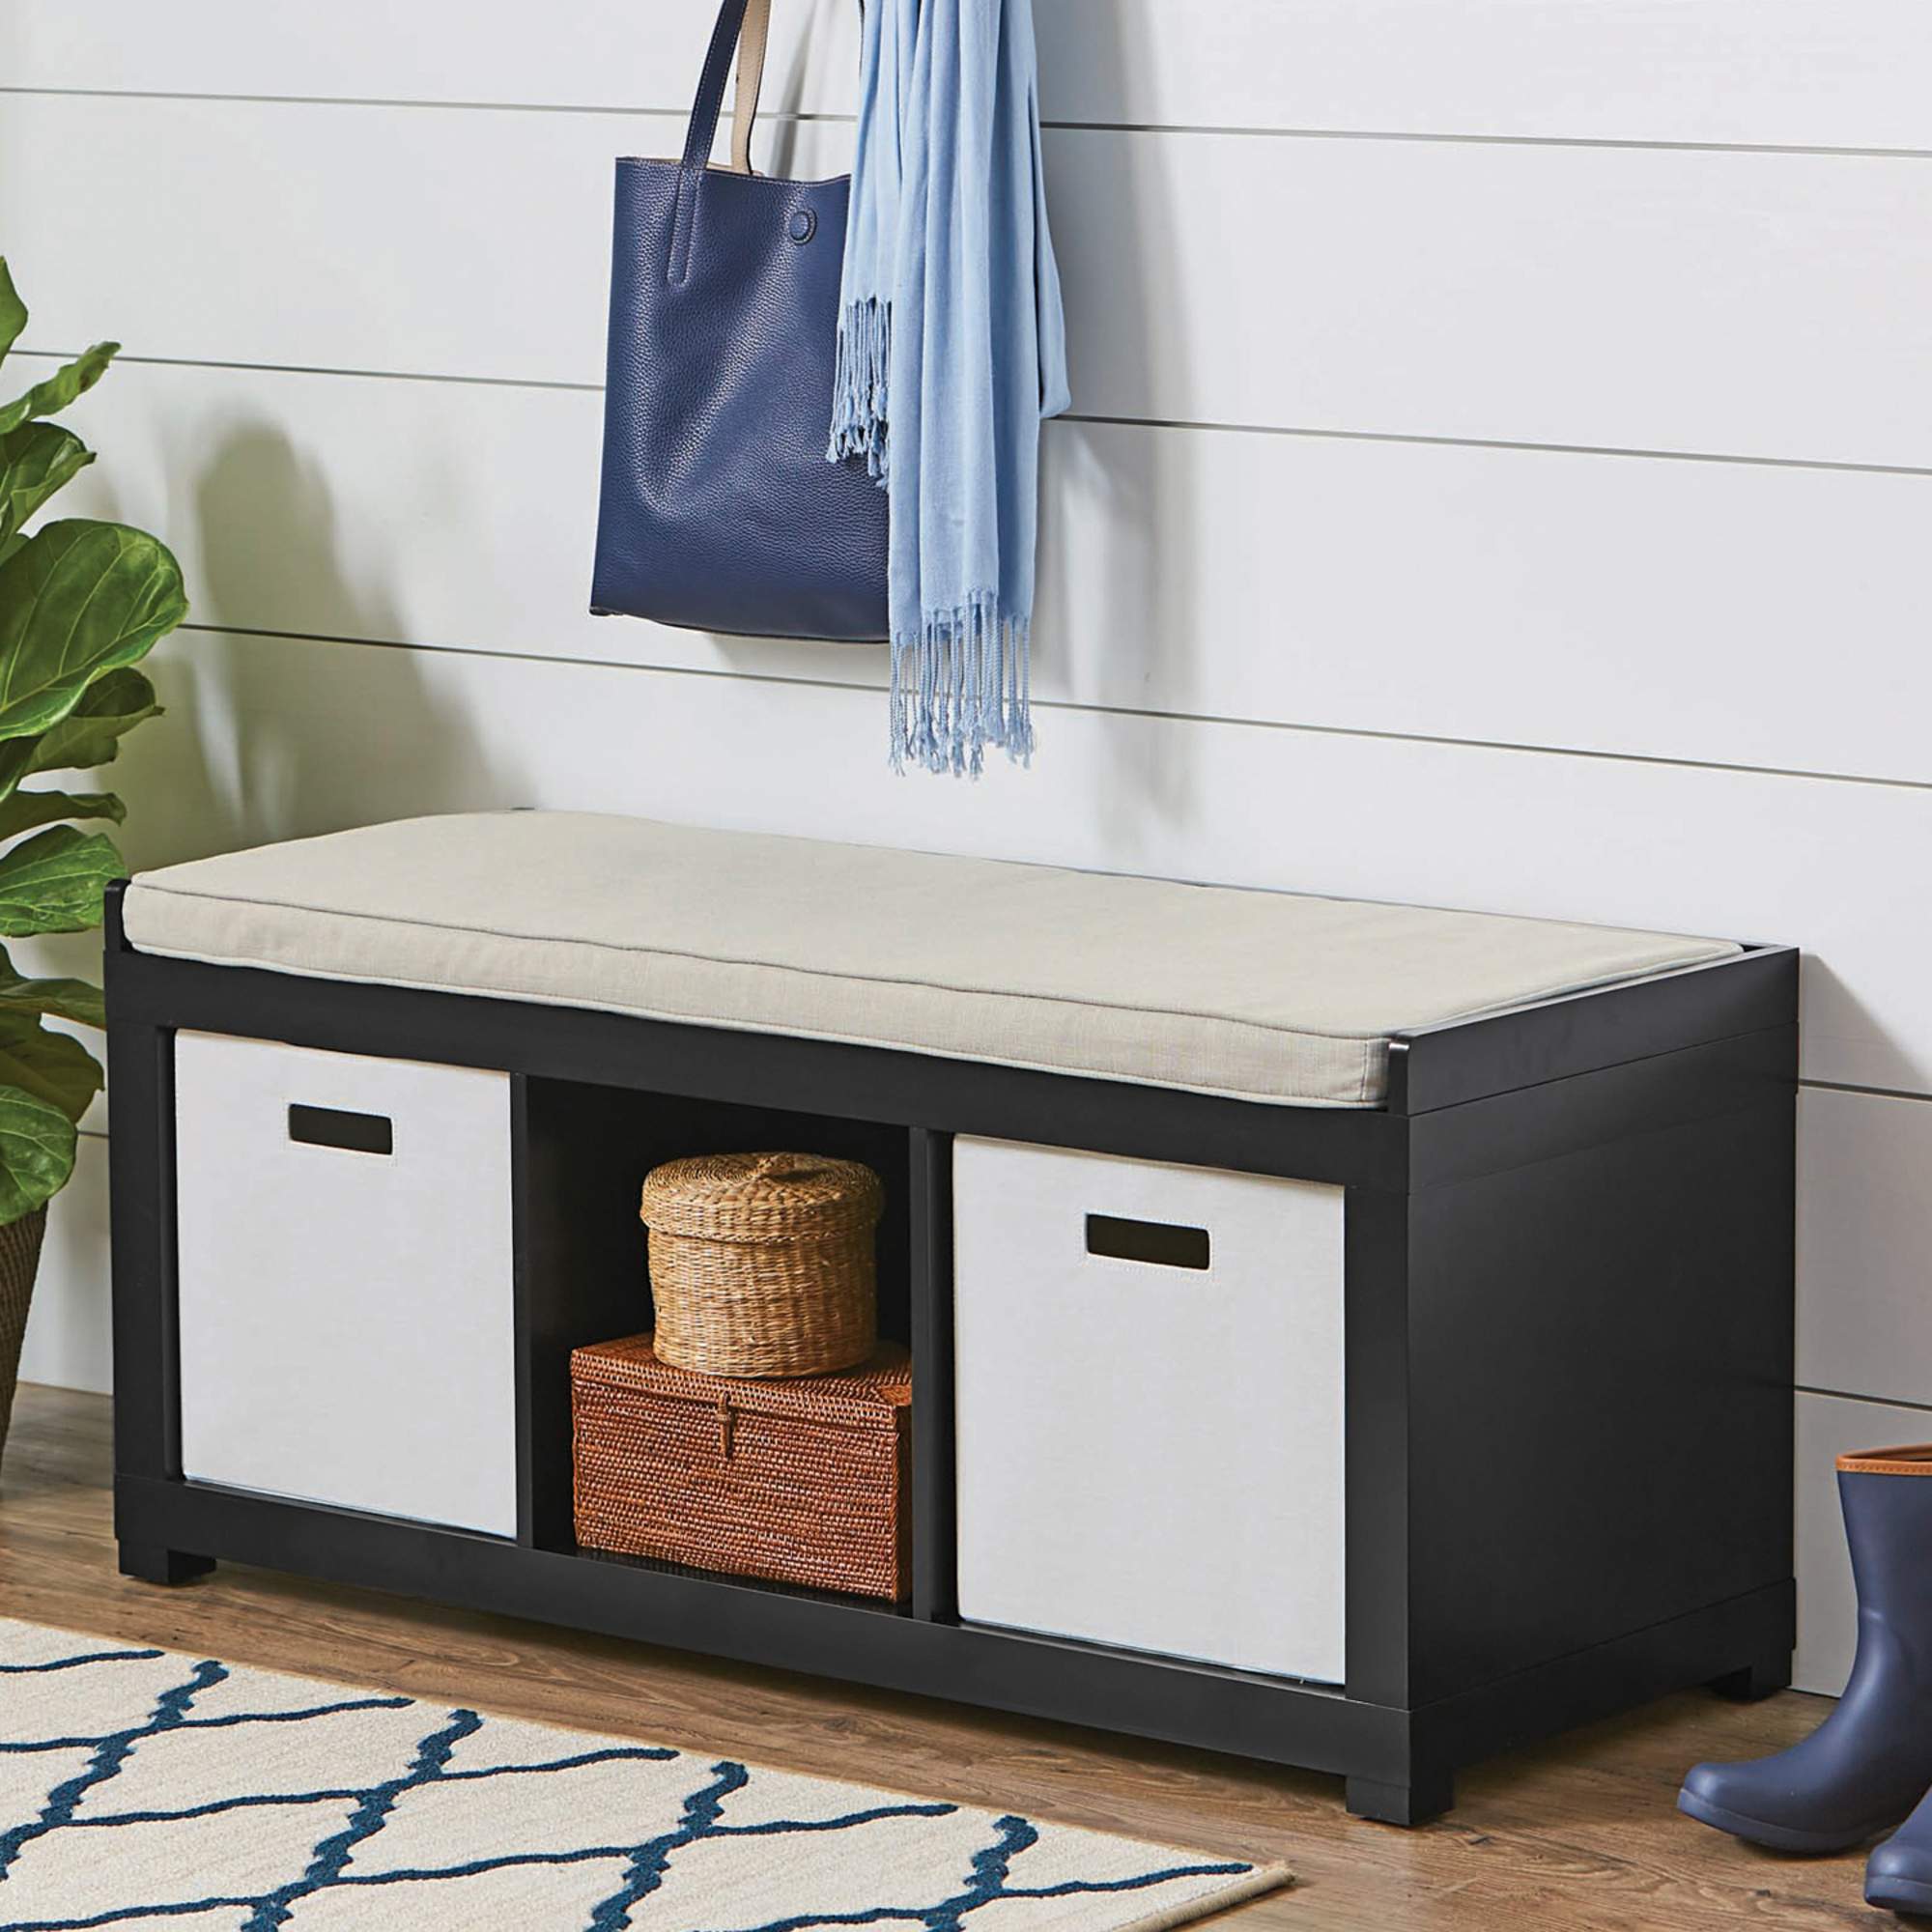 Better Homes & Gardens 3-Cube Shoe Storage Bench, Black - image 1 of 9